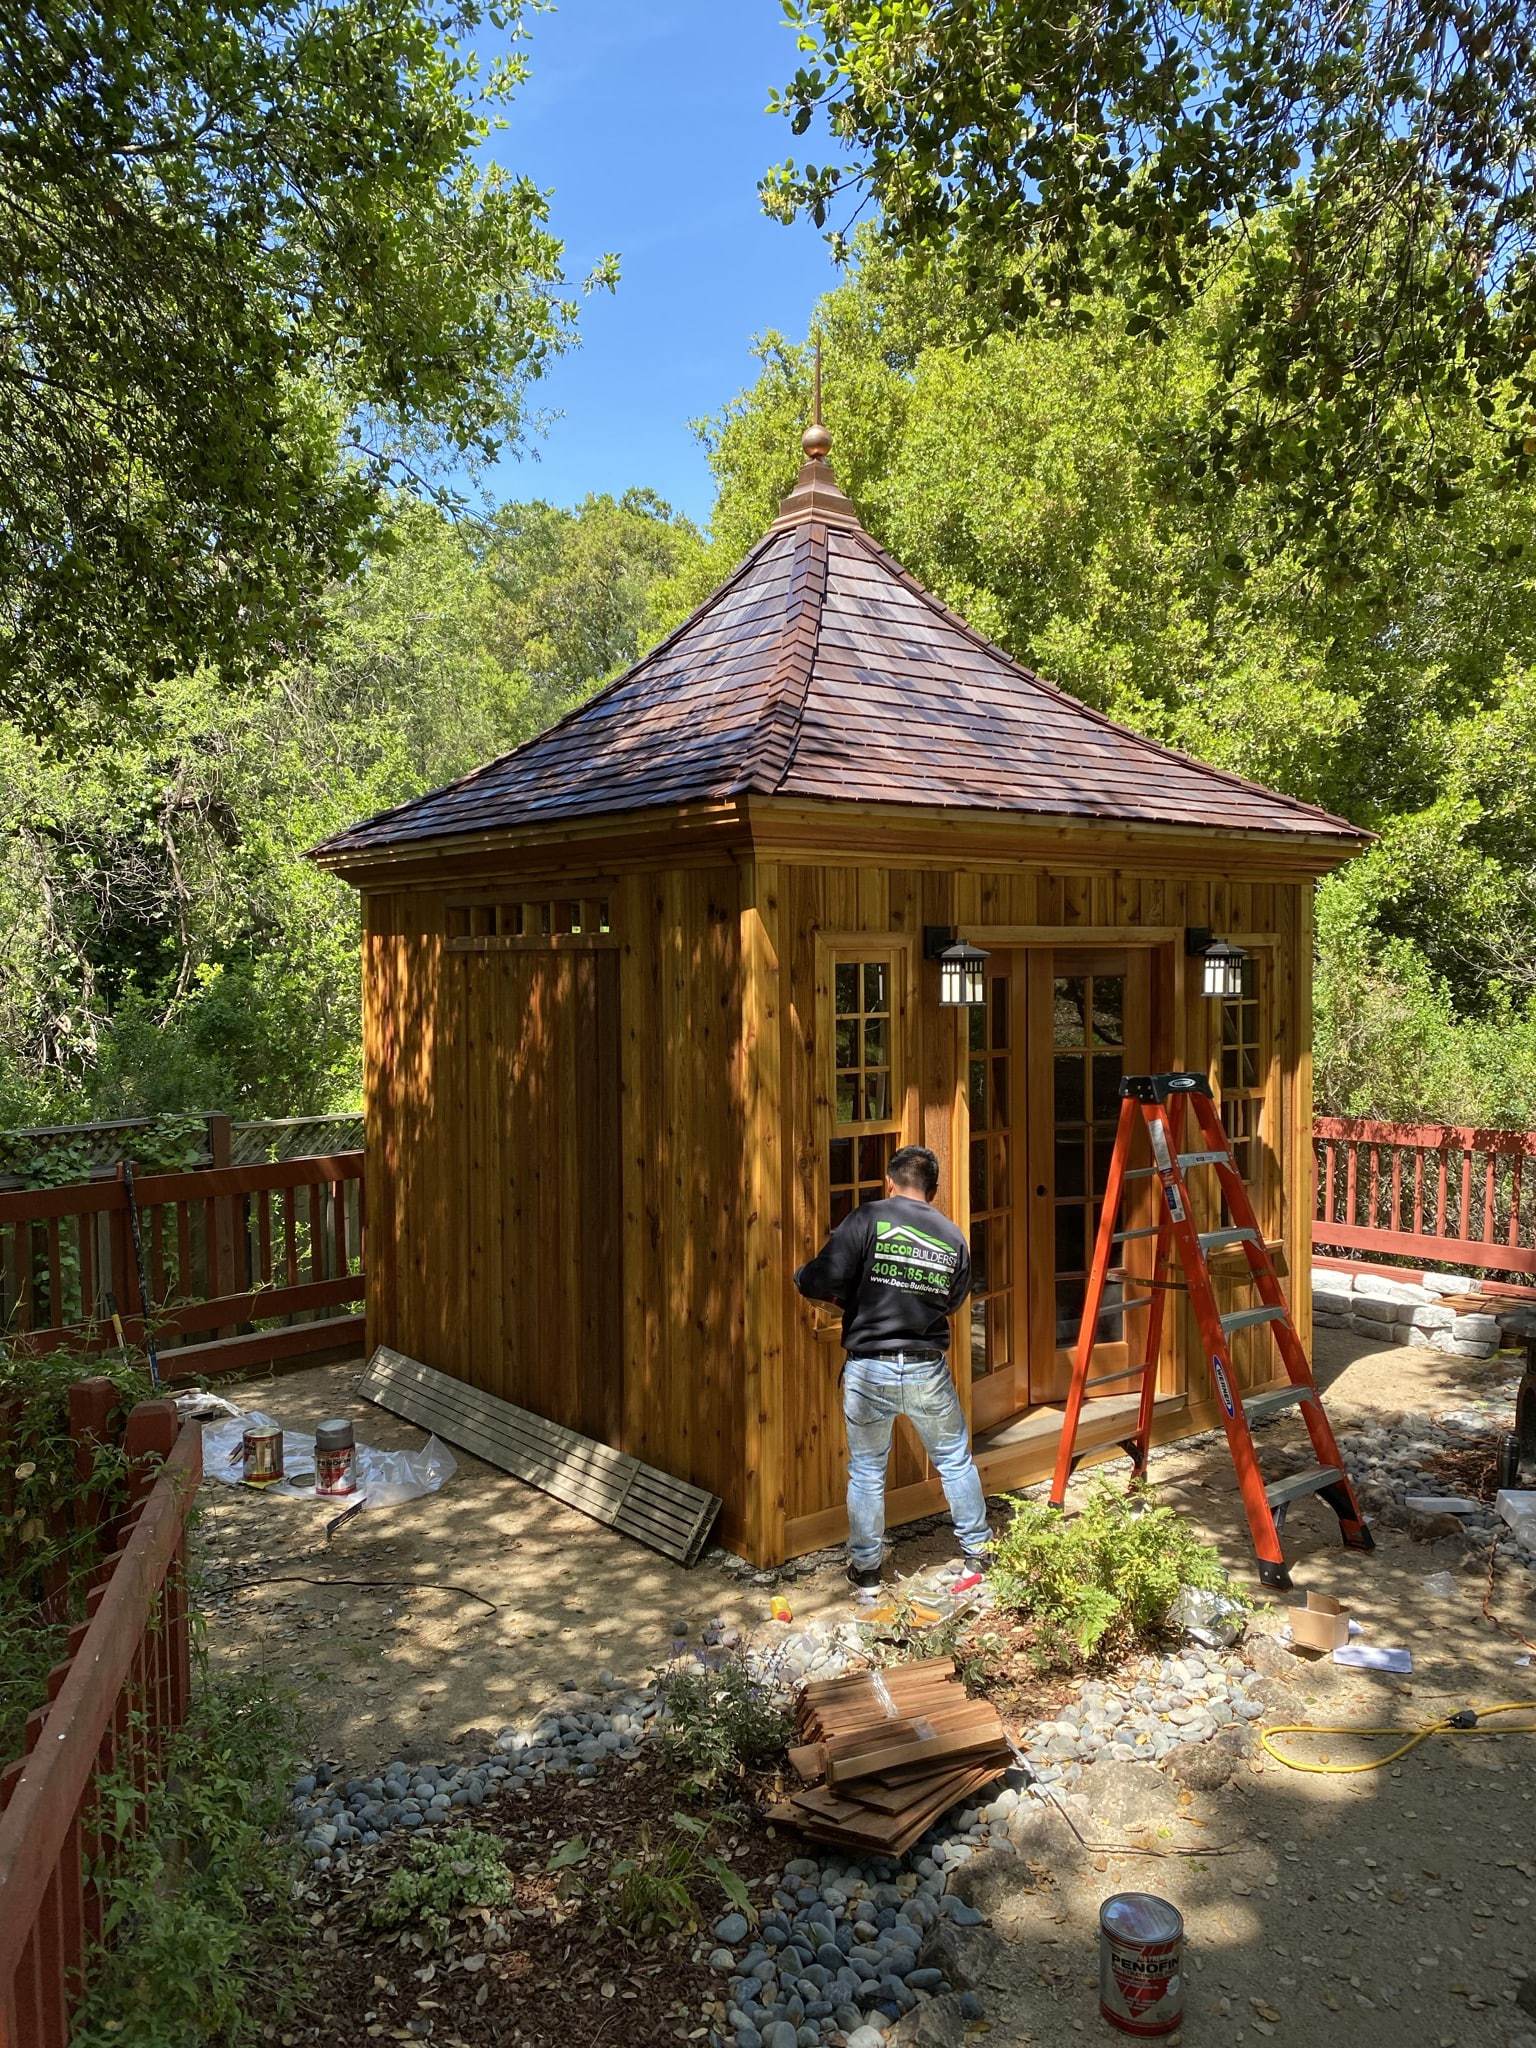 Interior view of 11’ x 11' Melbourne Garden Shed located in Saratoga, California – Summerwood Pr